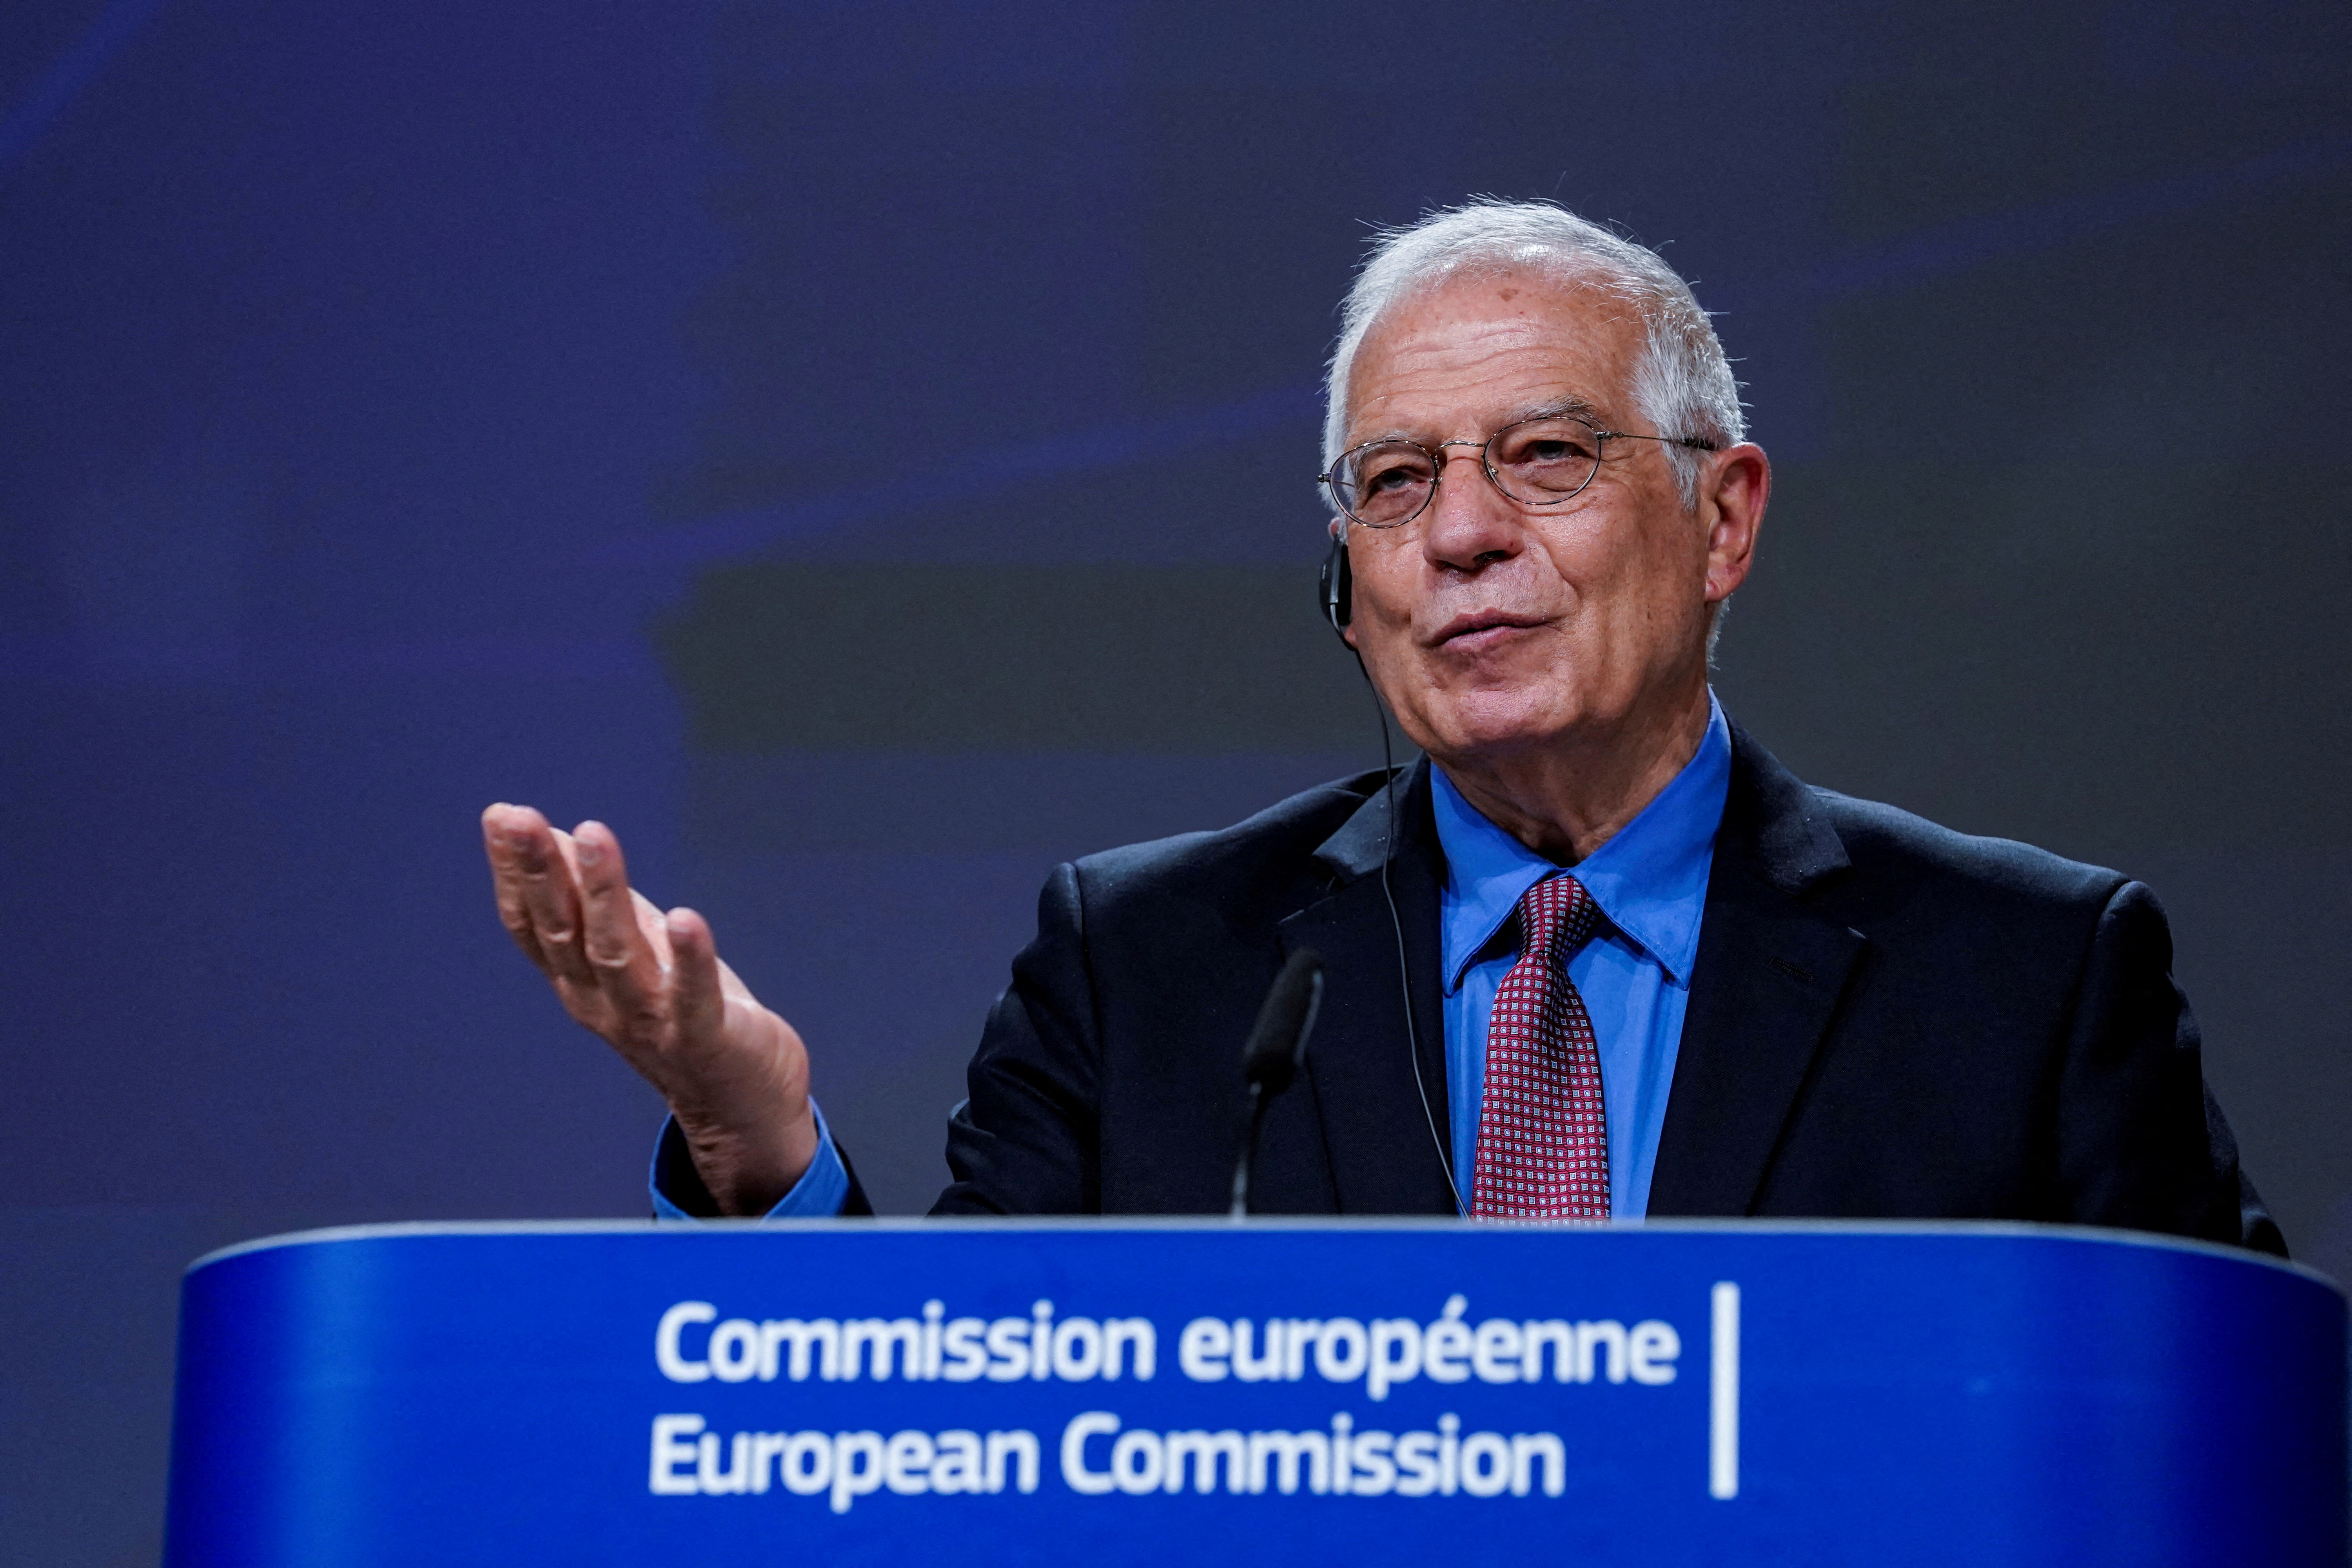 European High Representative of the Union for Foreign Affairs, Josep Borrell gestures as he speaks during a video press conference on the 10th EU-China Strategic Dialogue, at the European Commission in Brussels